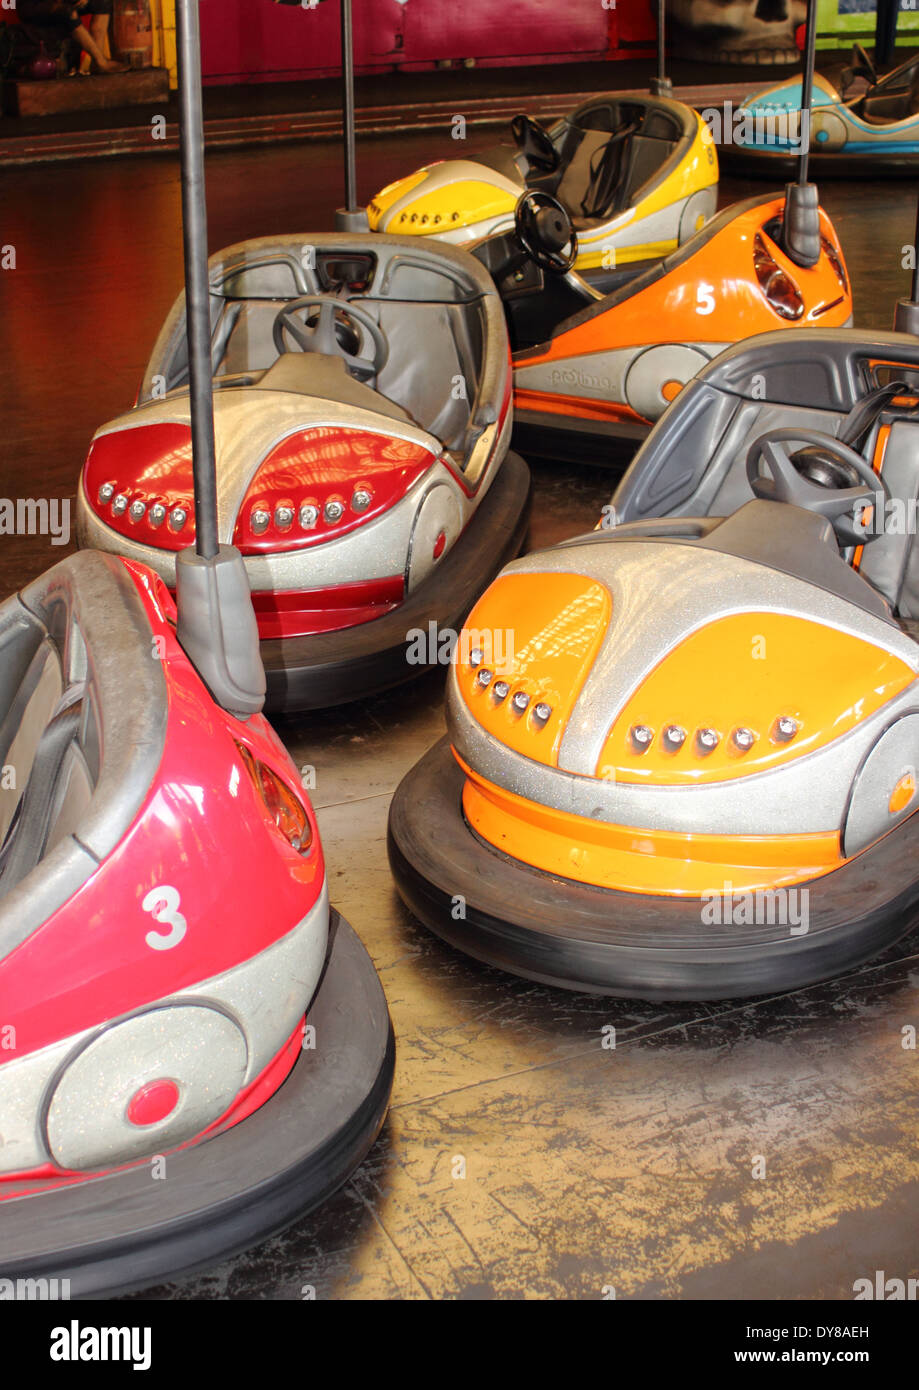 Empty red and orange bumper cars at fairground Stock Photo